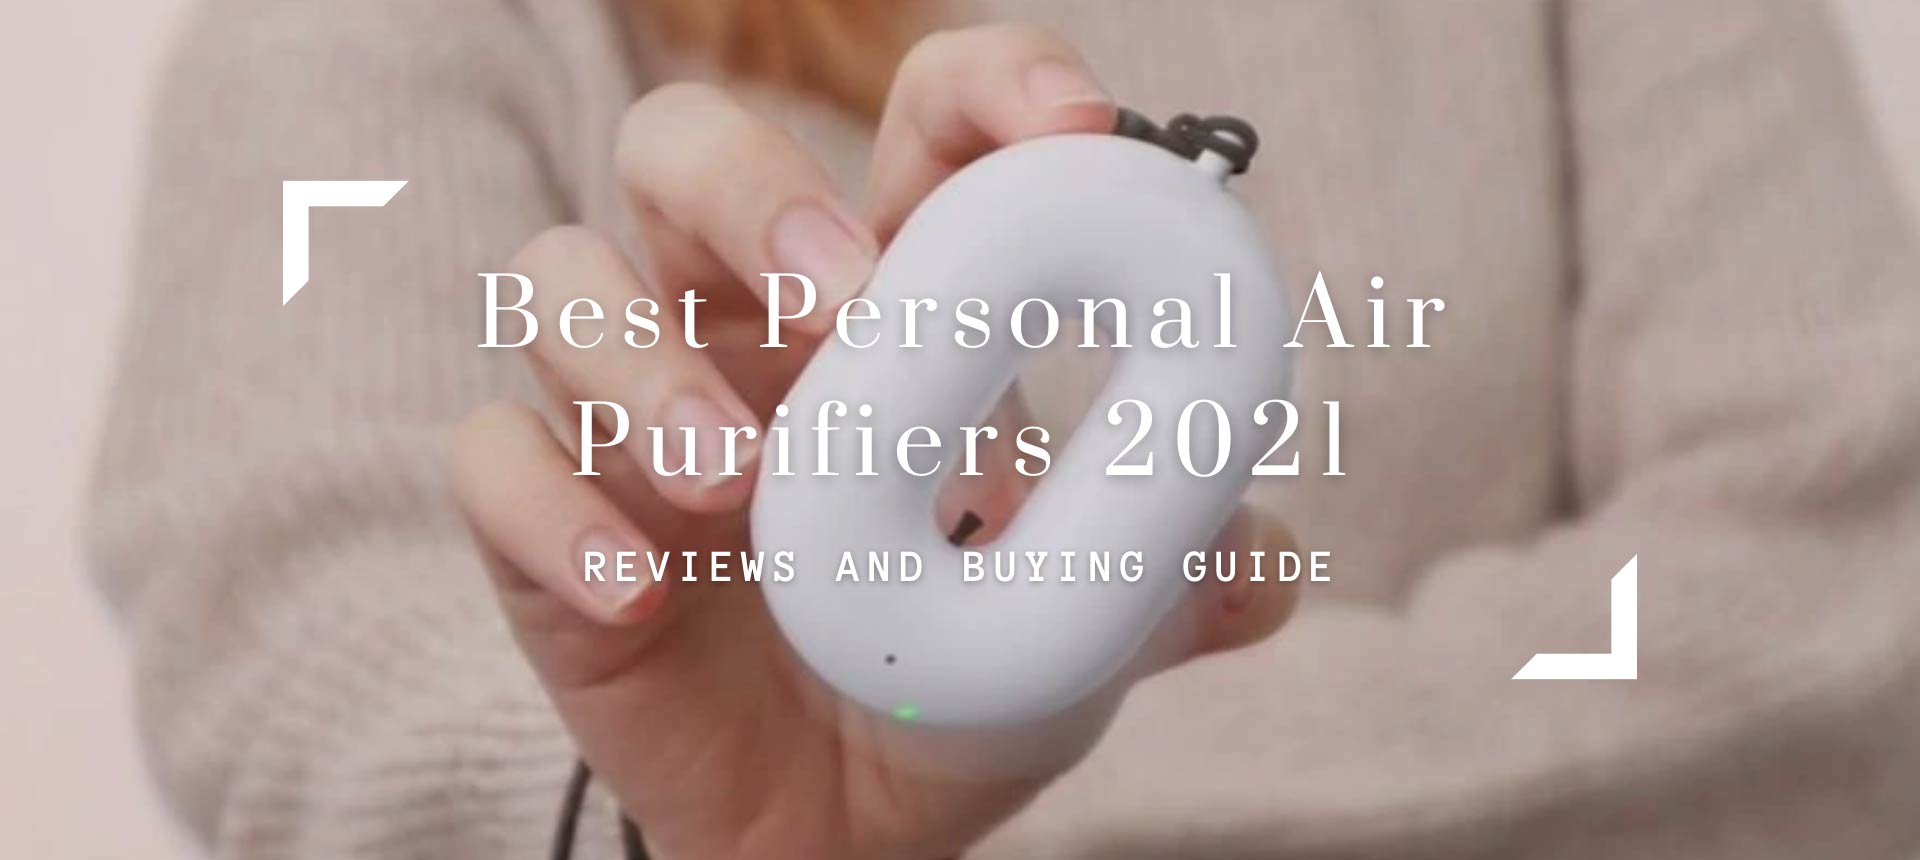 Best Personal Air Purifiers 2021